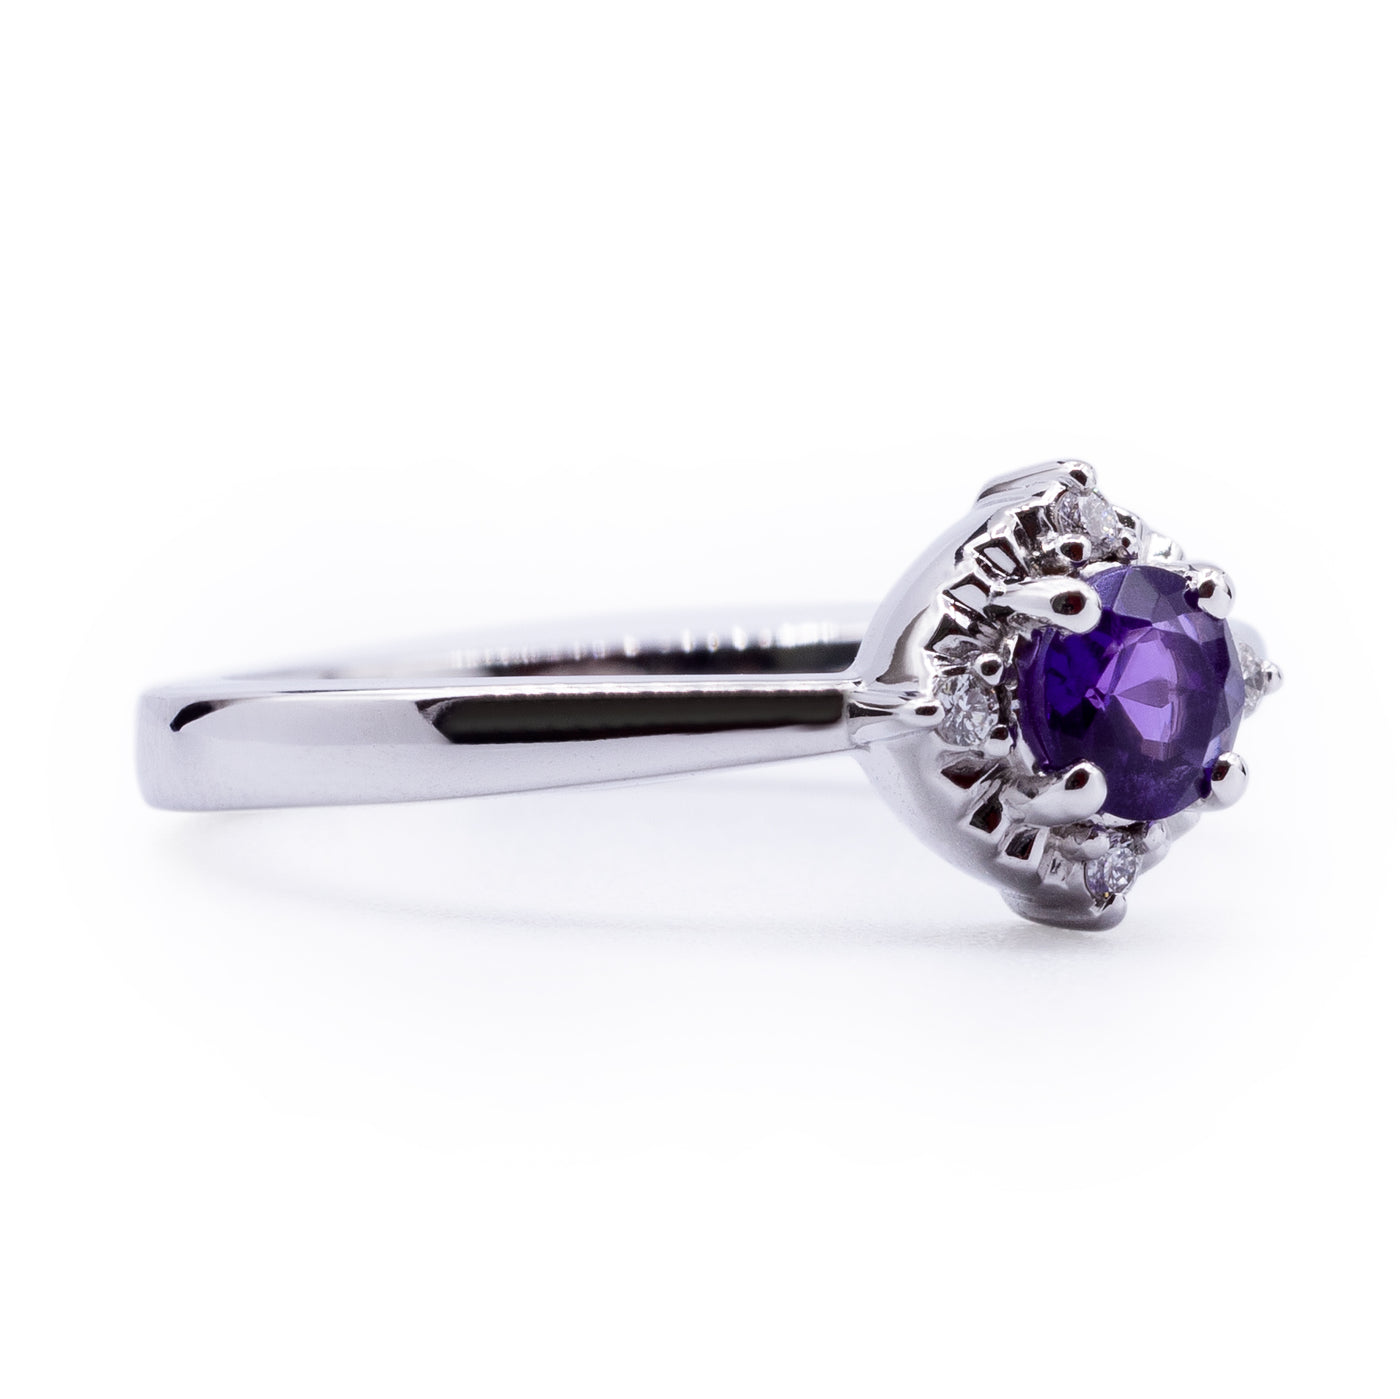 Round Amethyst Setting with Vintage Halo Ring